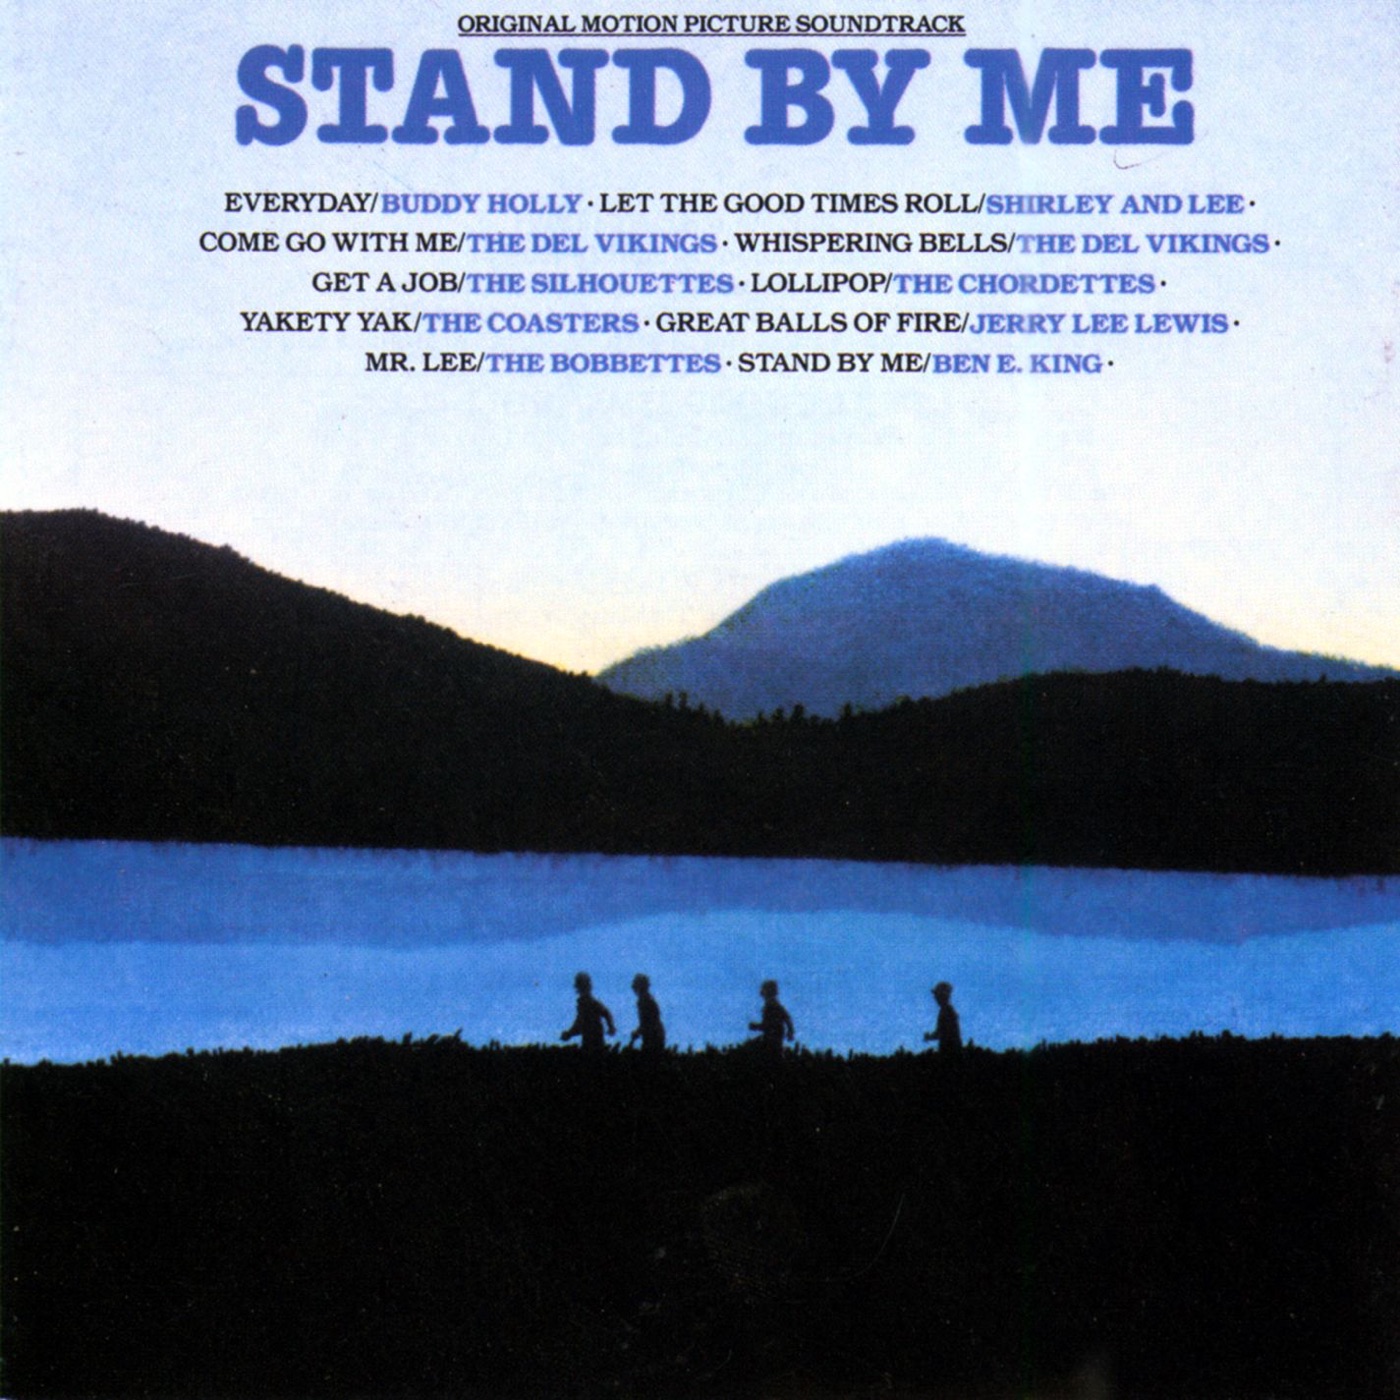 Stand By Me [Original Motion Picture Soundtrack] by Various Artists